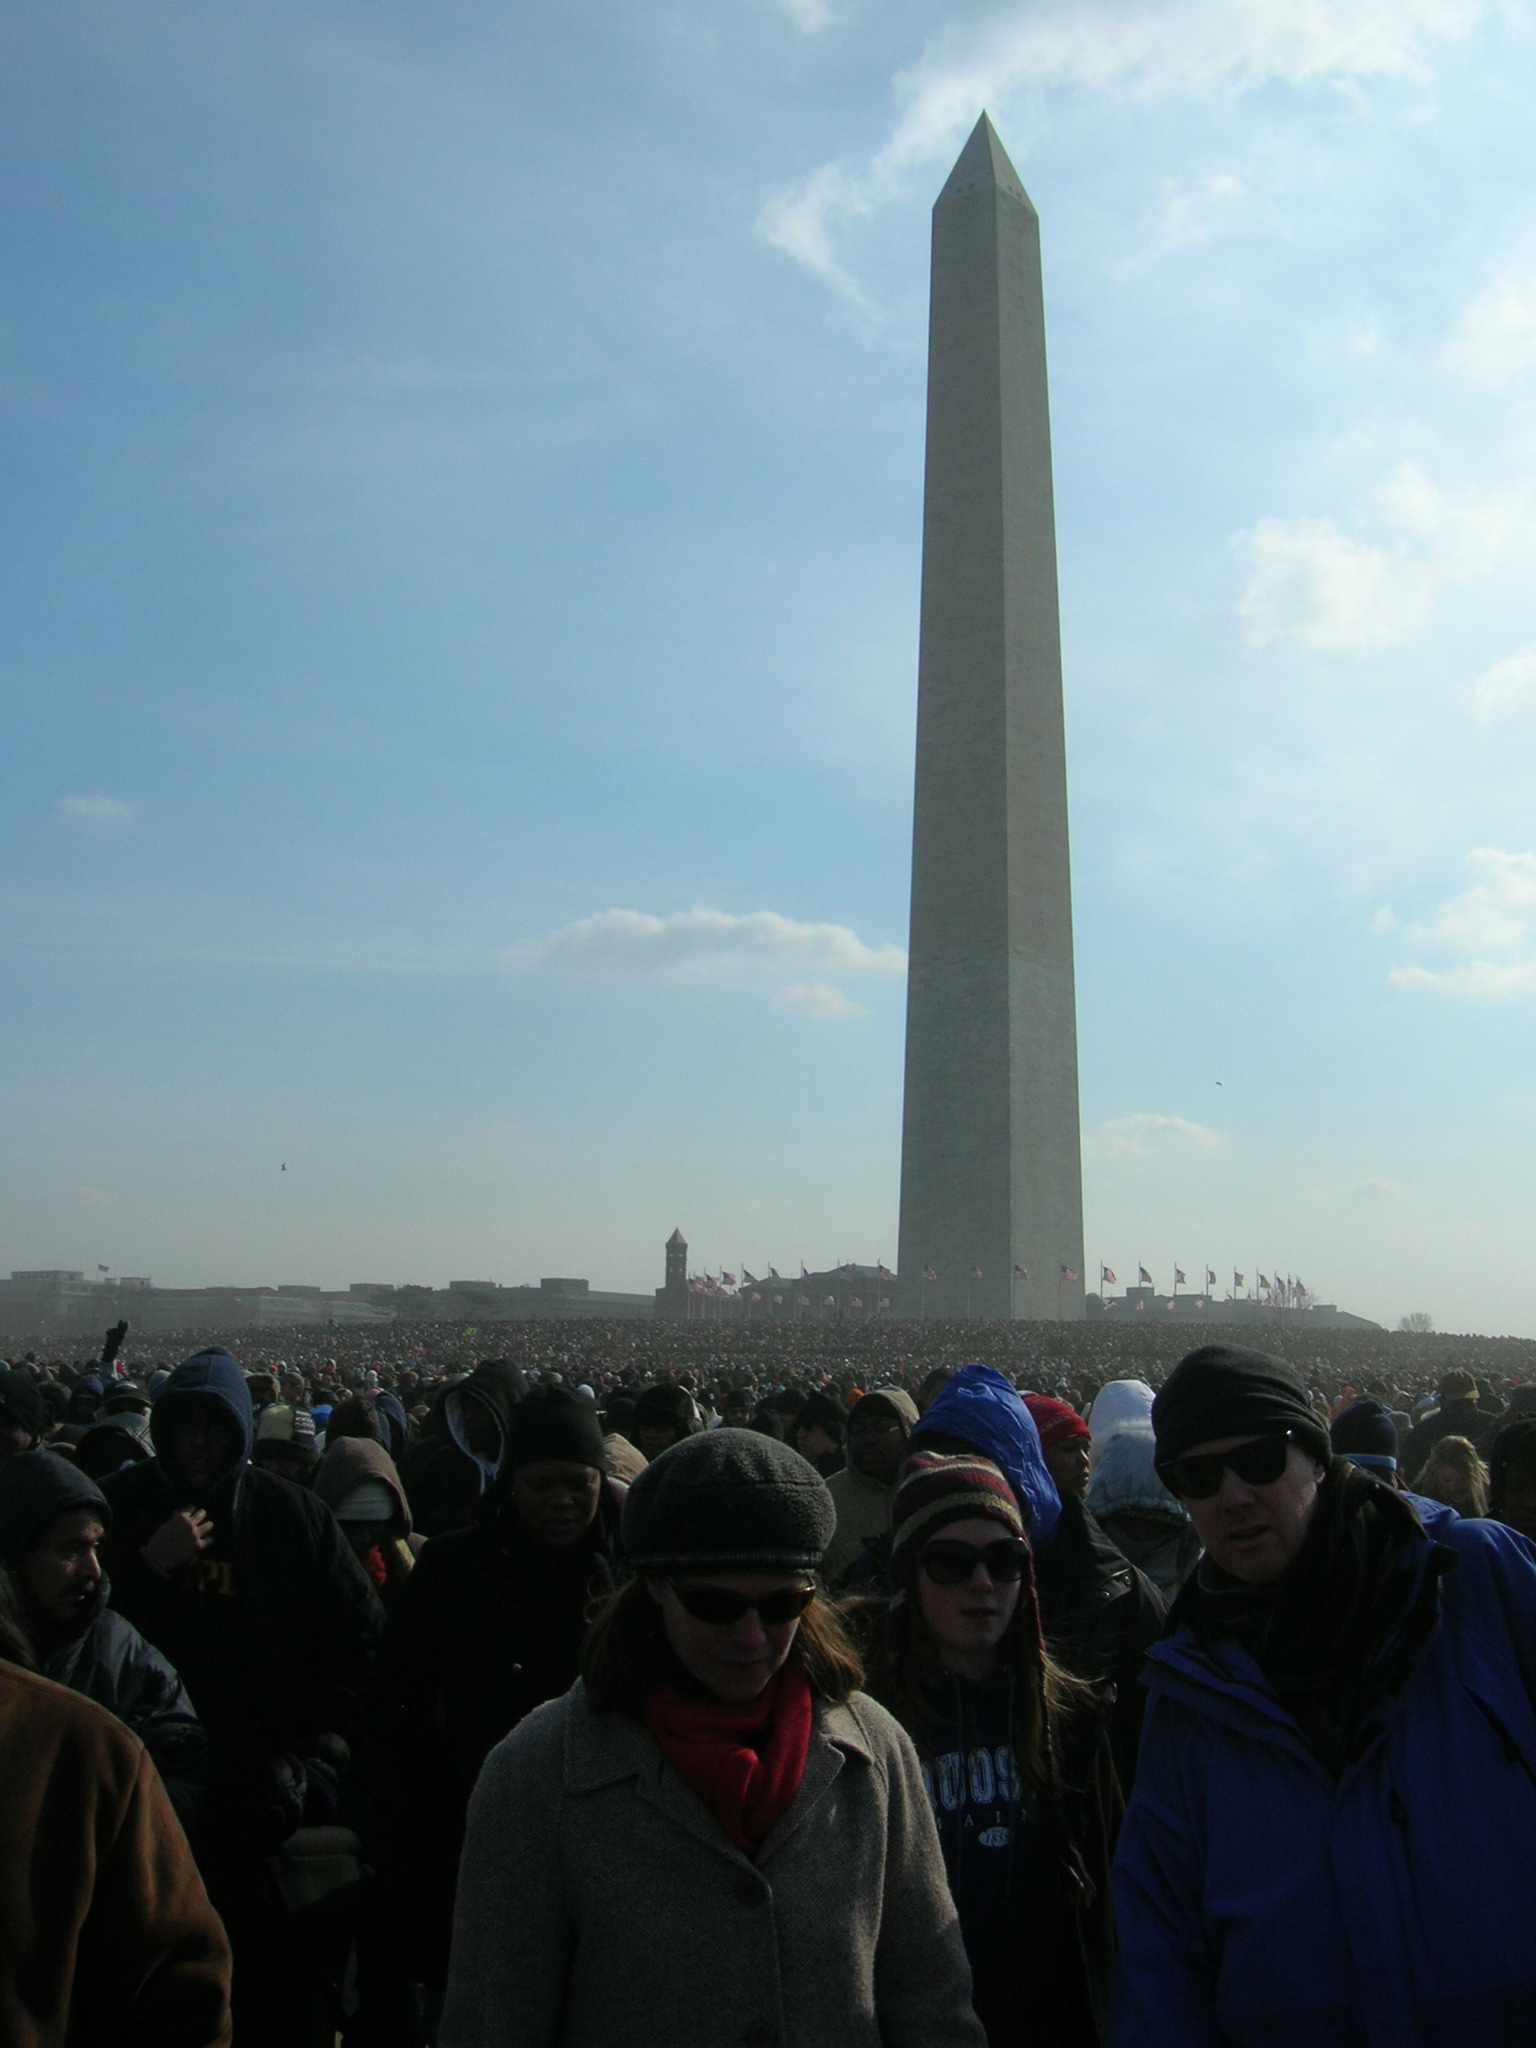 The Washington Memorial on the day of the inauguration.